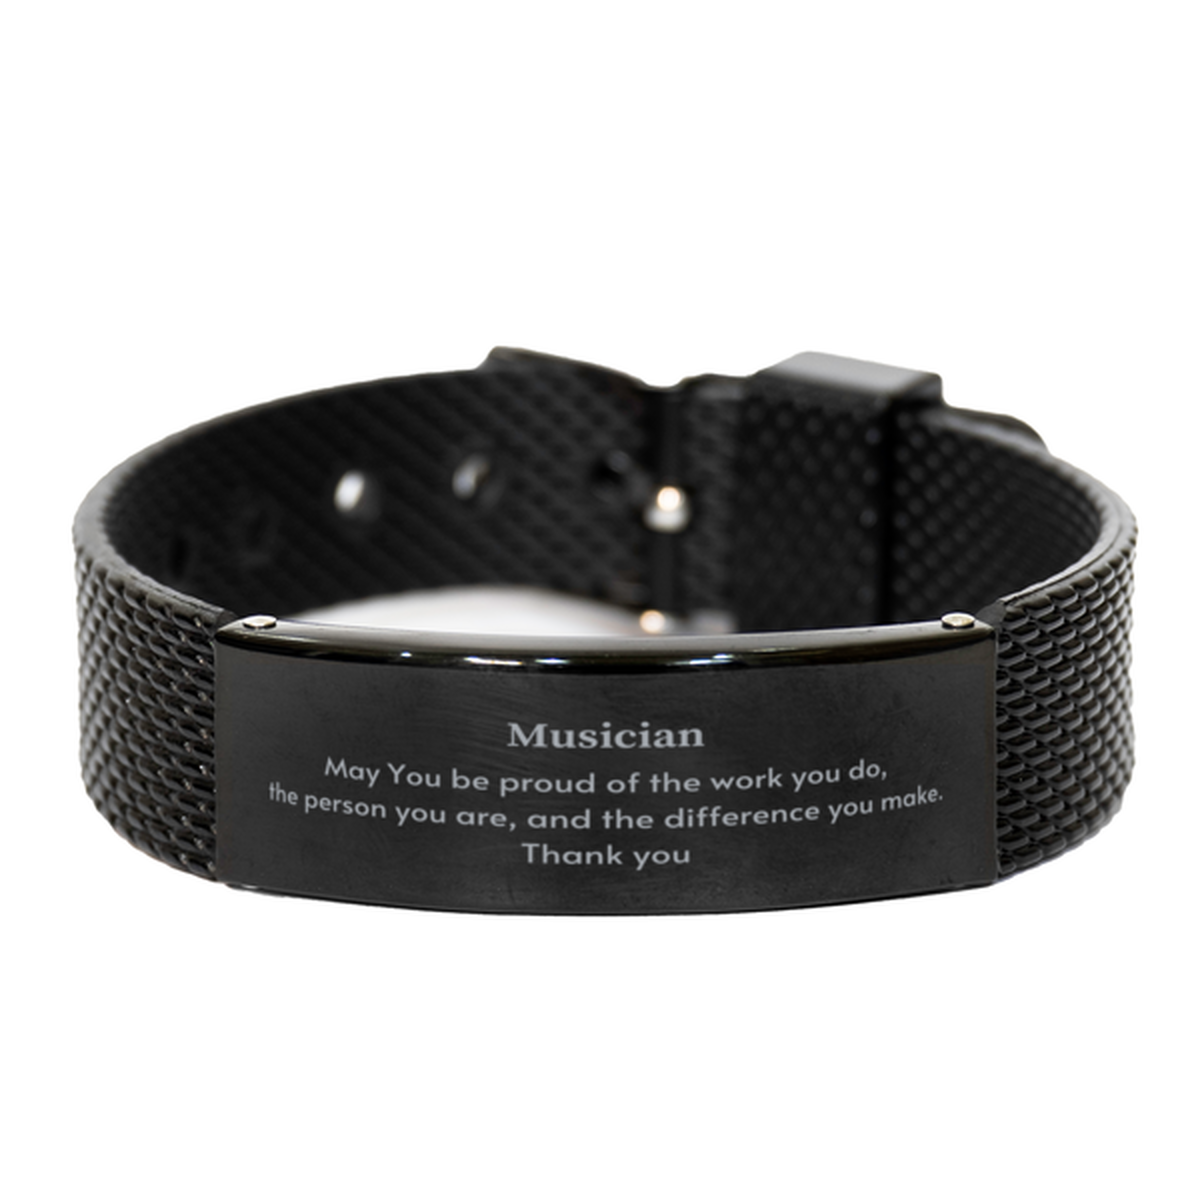 Heartwarming Black Shark Mesh Bracelet Retirement Coworkers Gifts for Musician, Musician May You be proud of the work you do, the person you are Gifts for Boss Men Women Friends